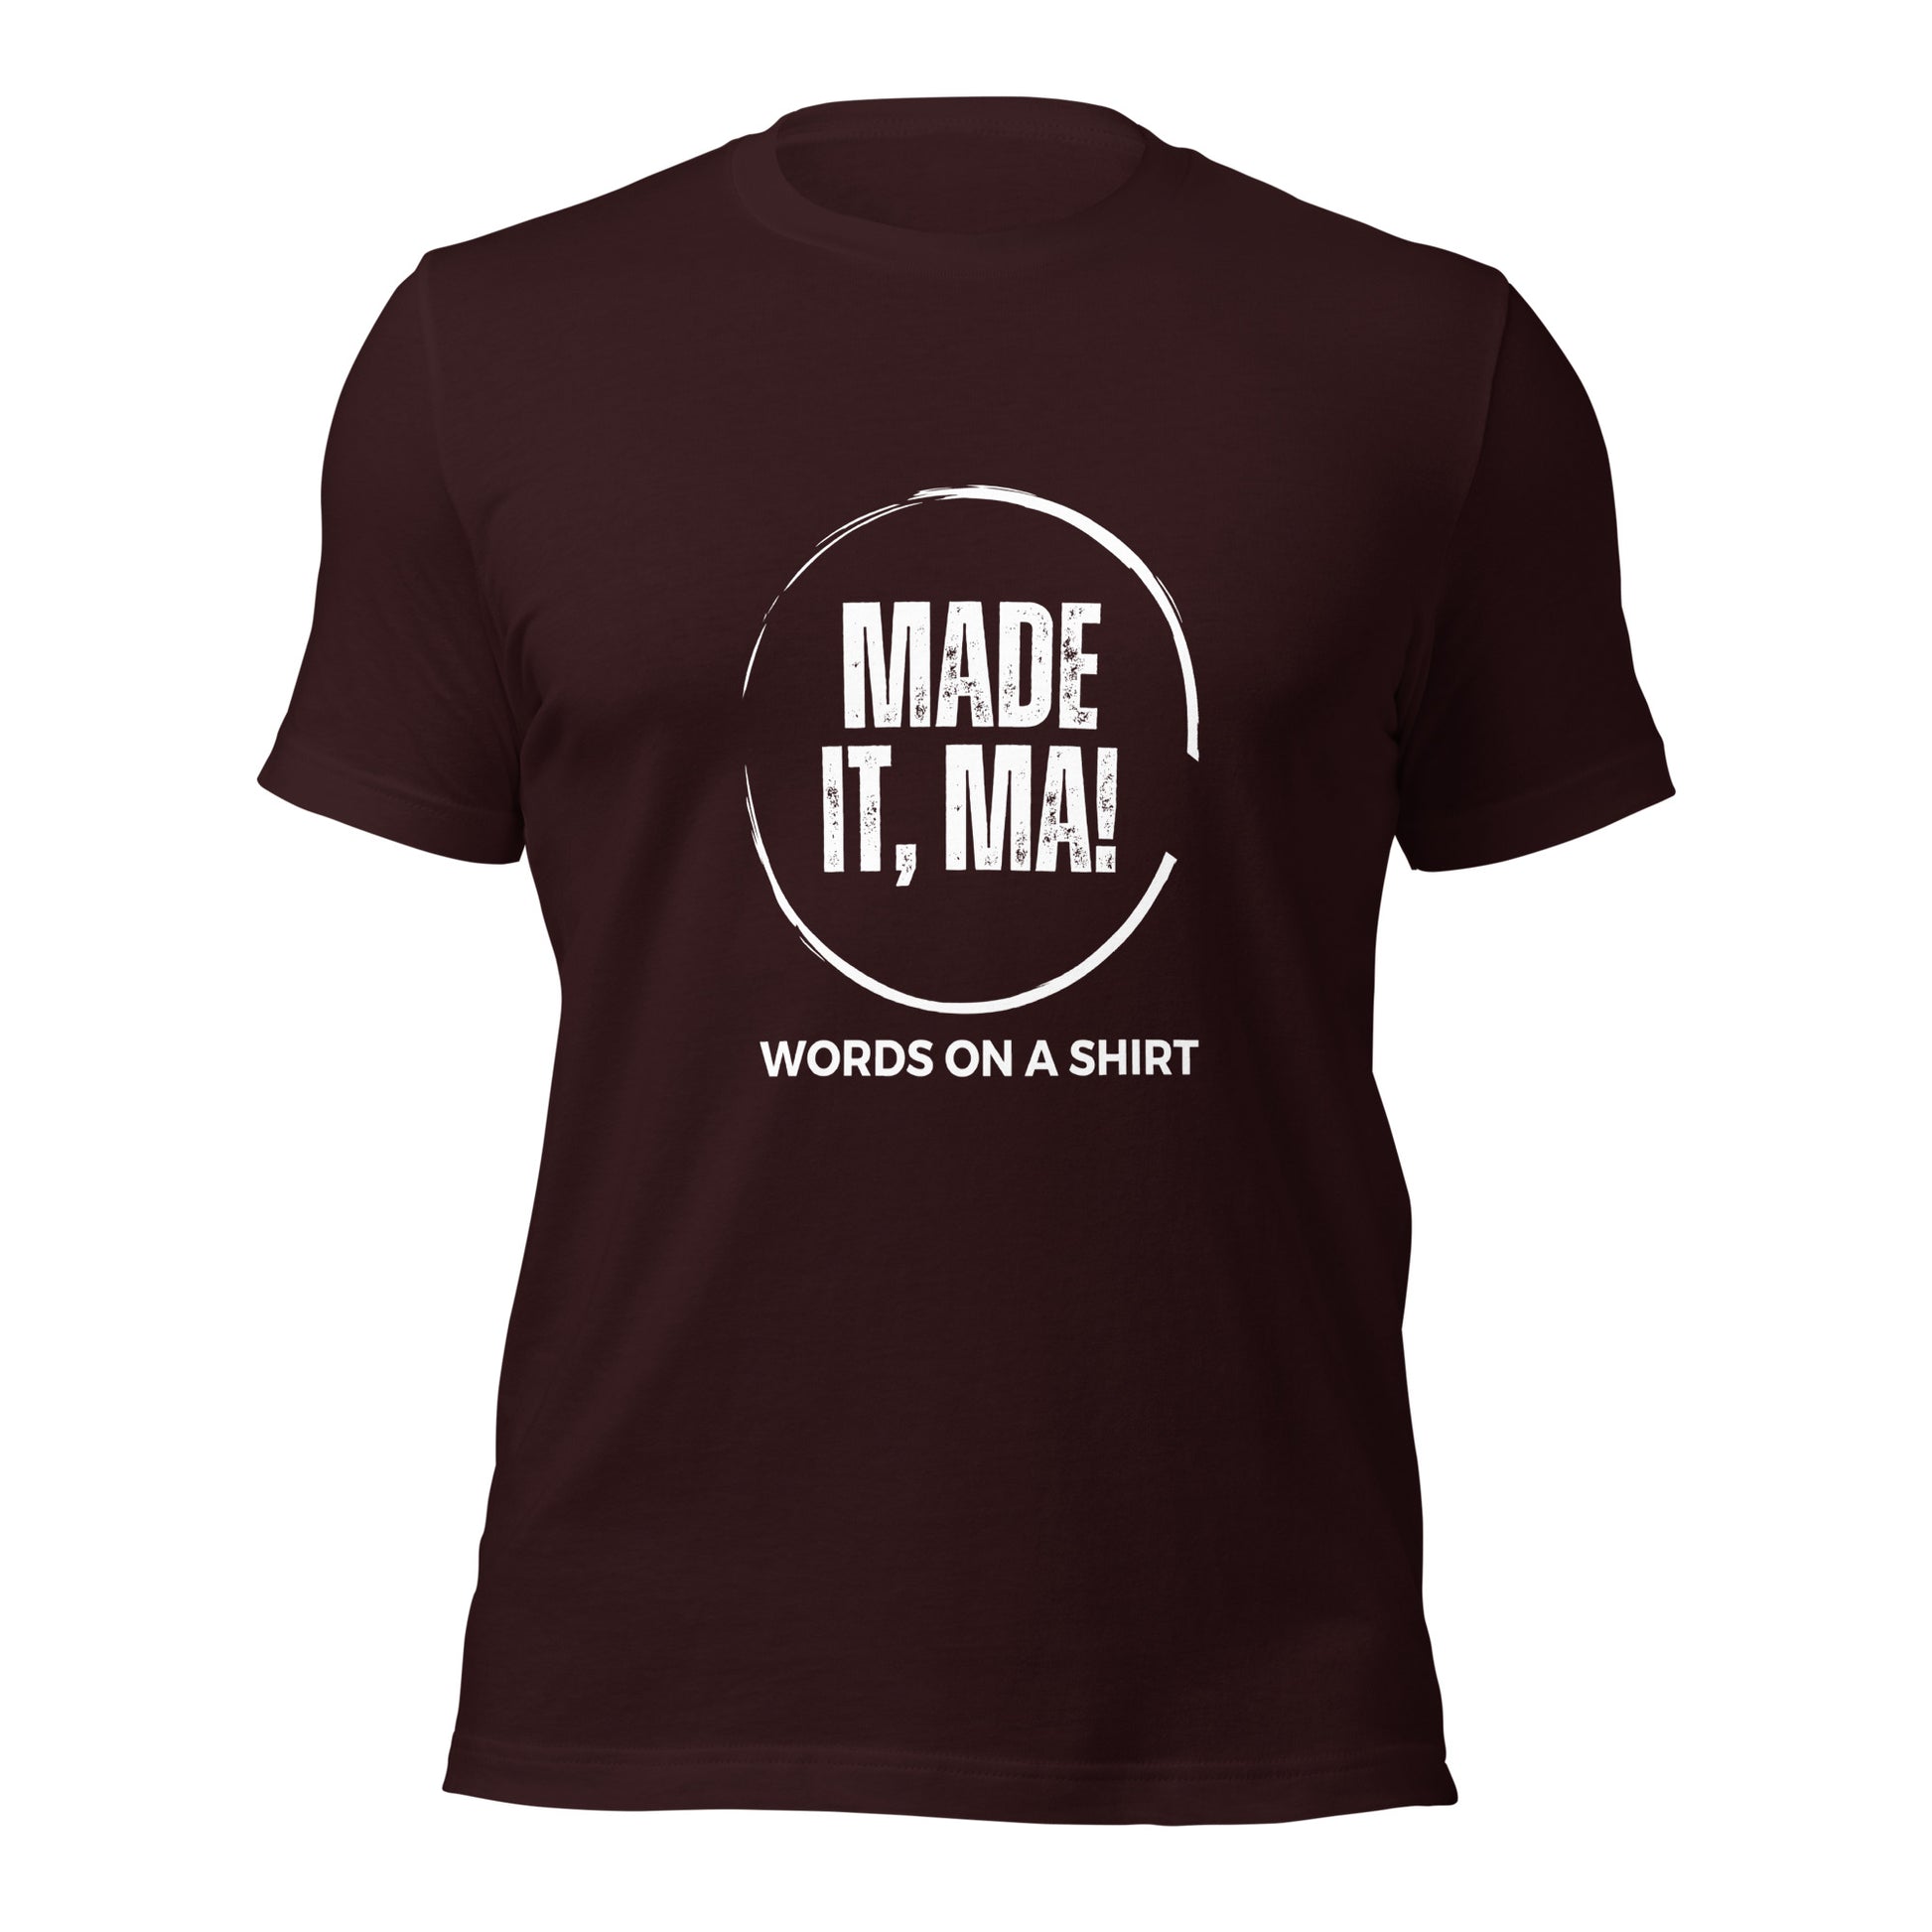 Let mom know your success with our Unisex T-Shirt-Made It Ma. Experience the best 100% cotton fabric that's pre-shrunk and has side-seamed construction. And the fit? Simply unbeatable.